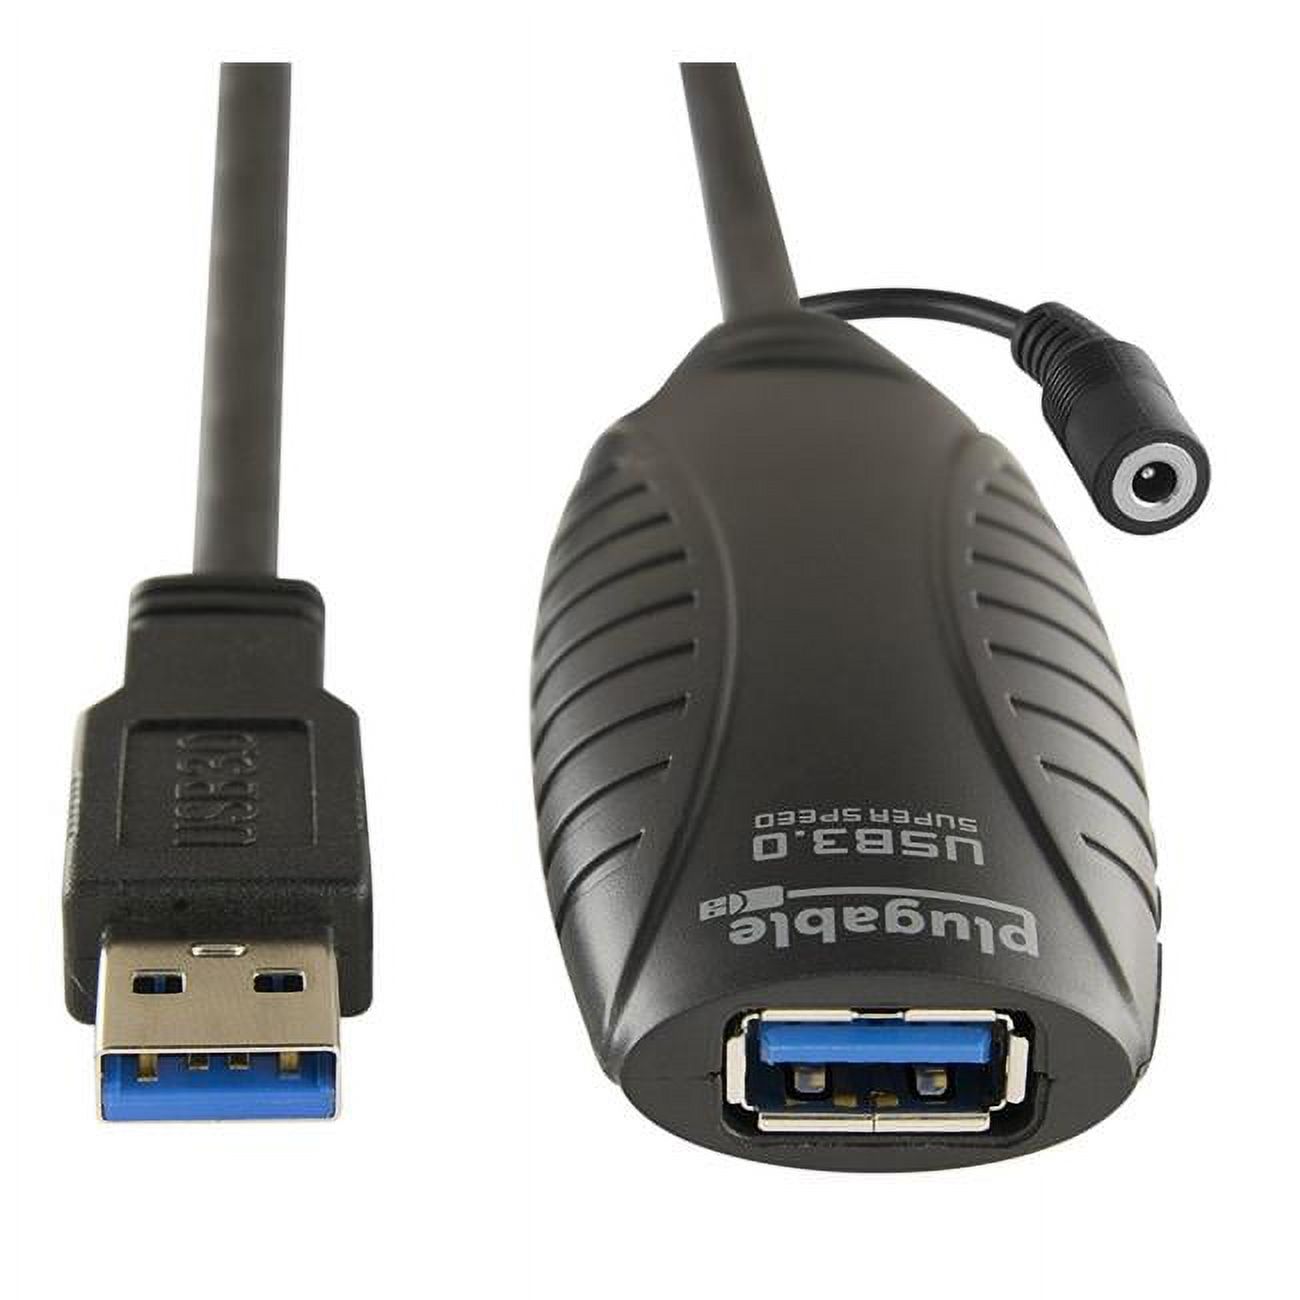 Plugable 10 Meter (32 Foot) USB 3.0 Active Extension Cable with AC Power Adapter and Back-Voltage Protection - image 1 of 5